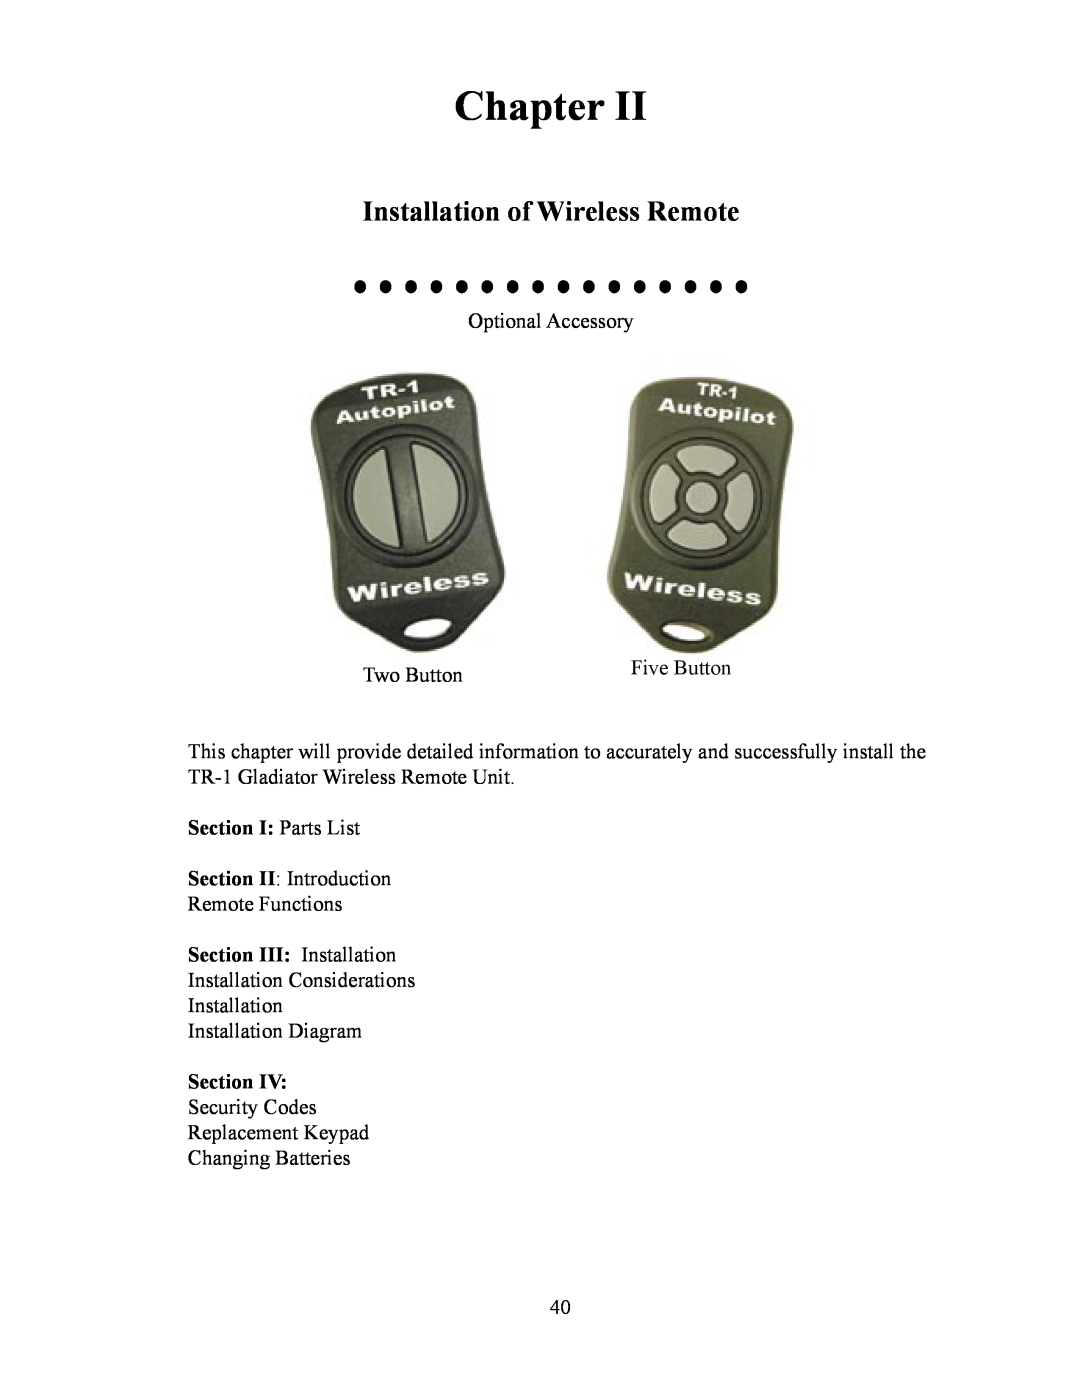 Garmin TR-1 manual Chapter, Installation of Wireless Remote, Section I Parts List, Section III Installation 